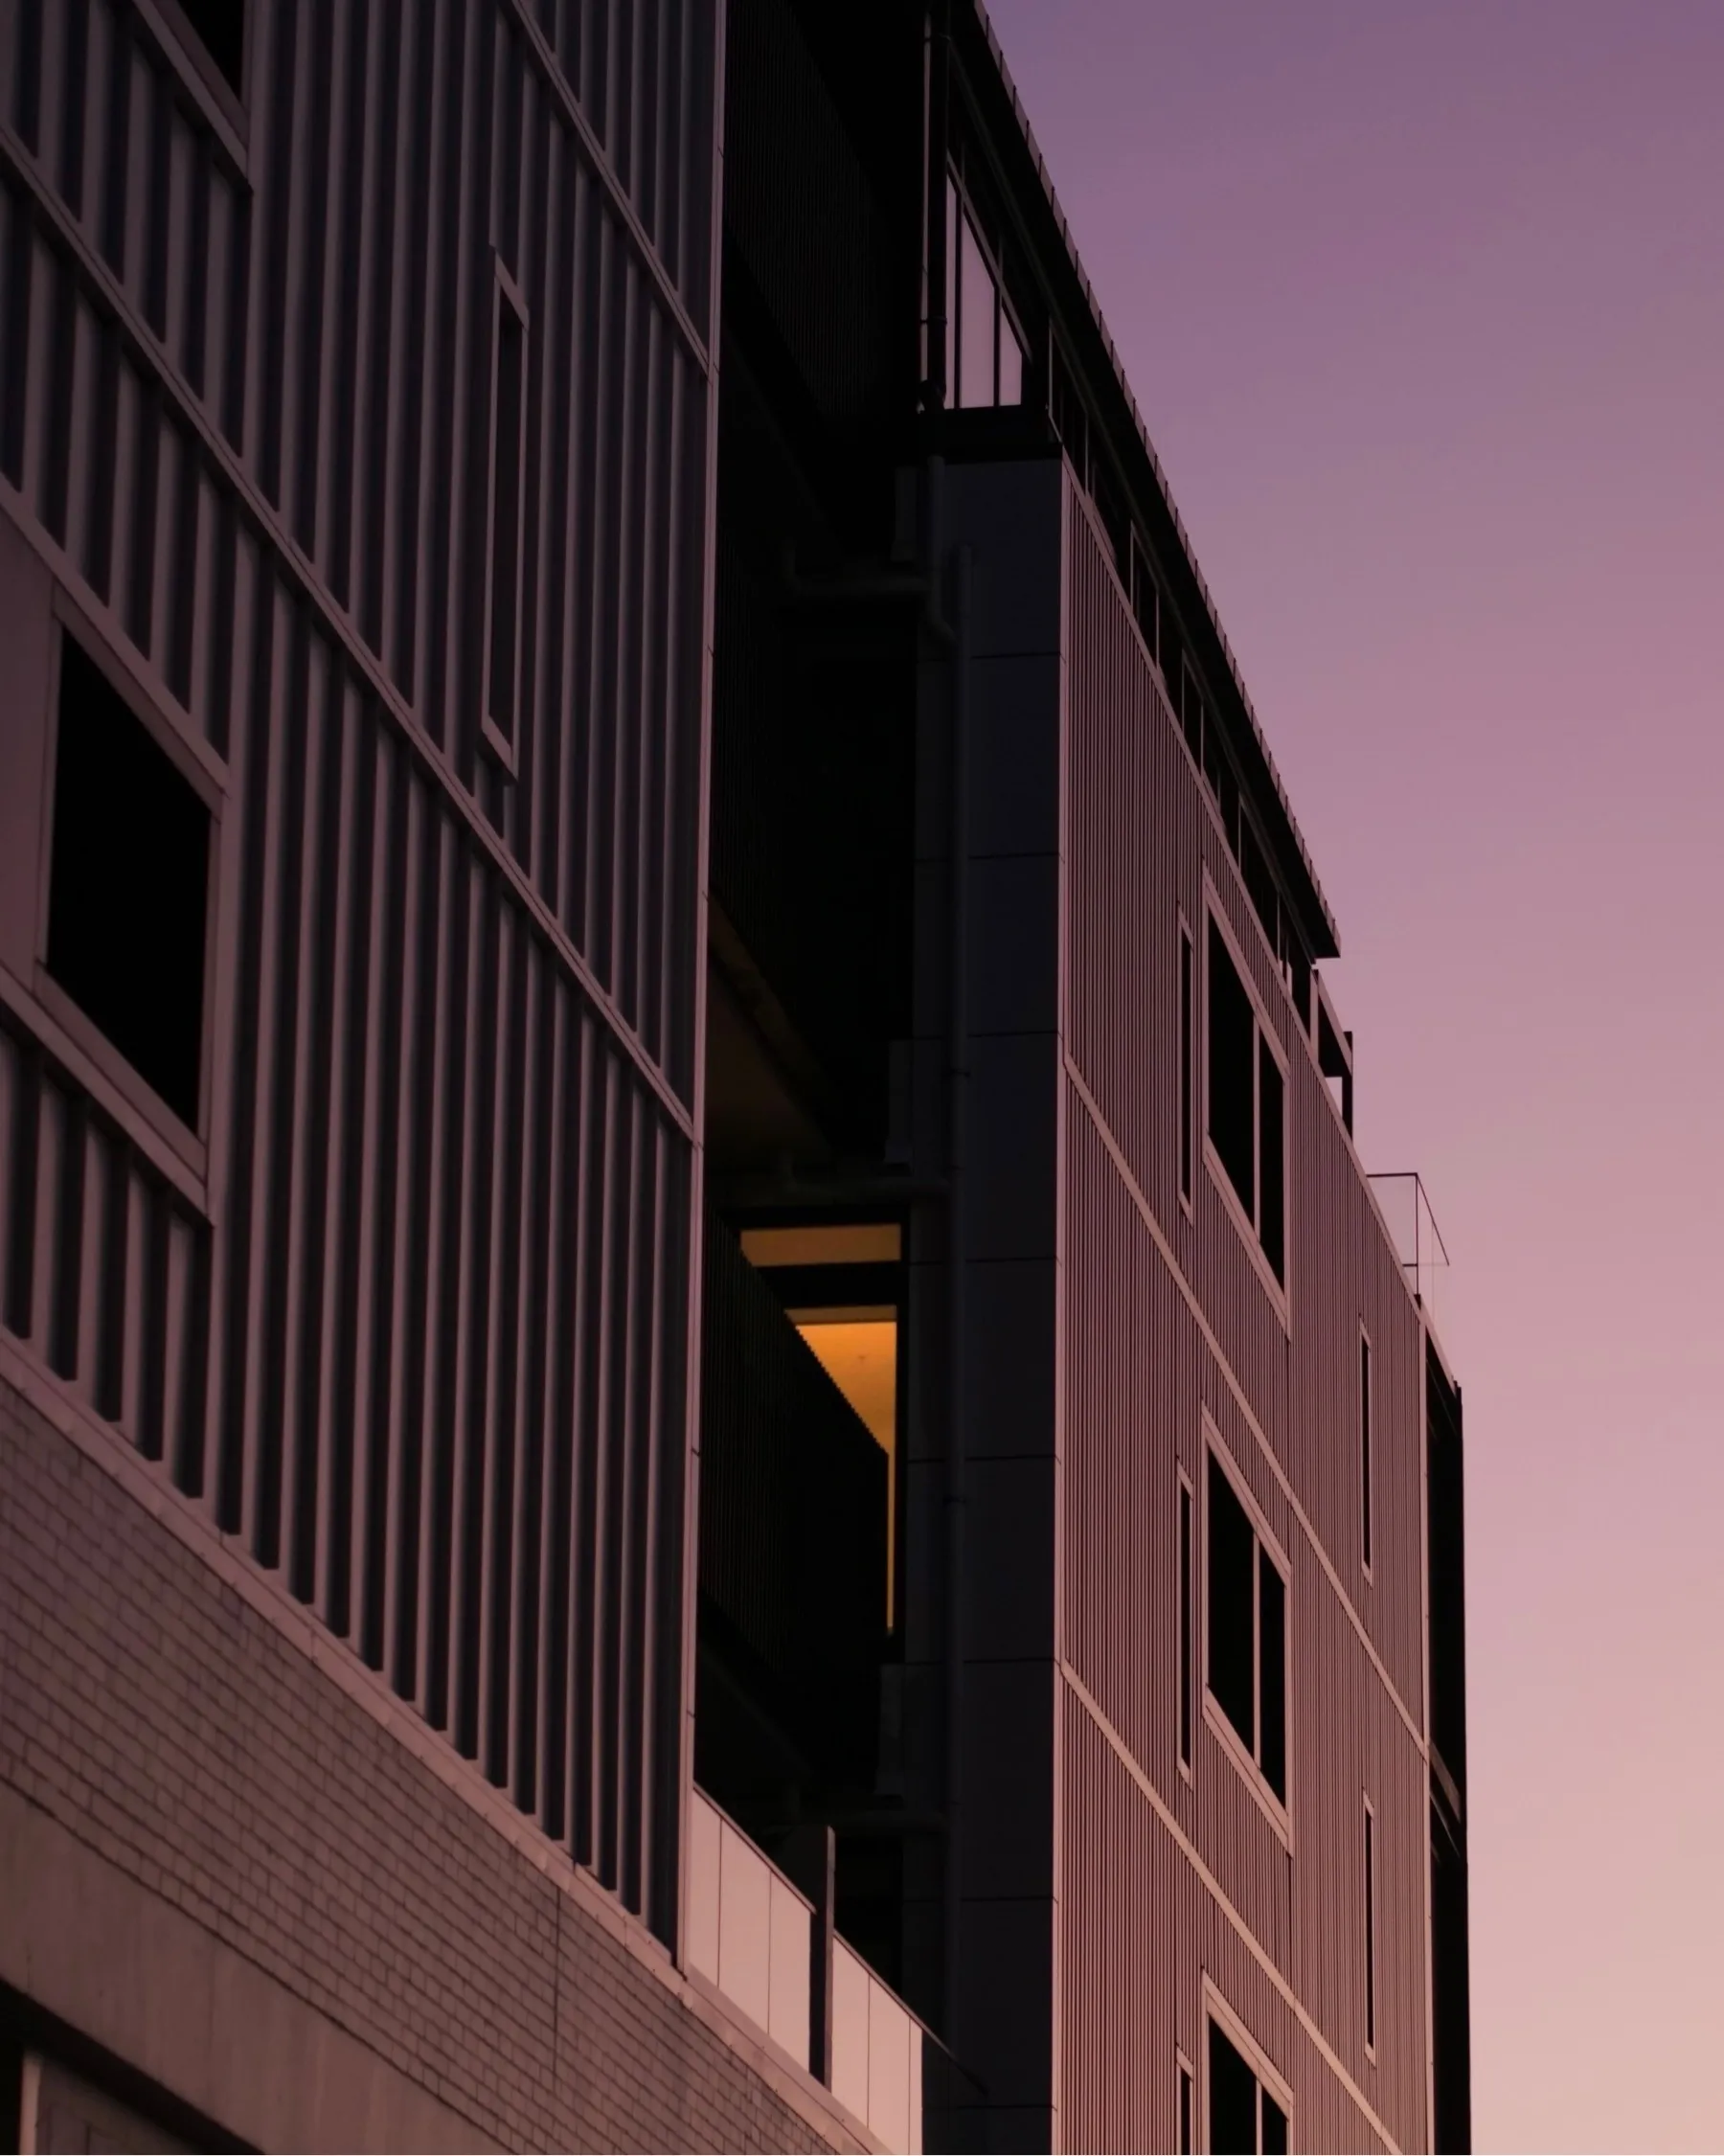 A dark grey building reflecting the violet wash of sunset